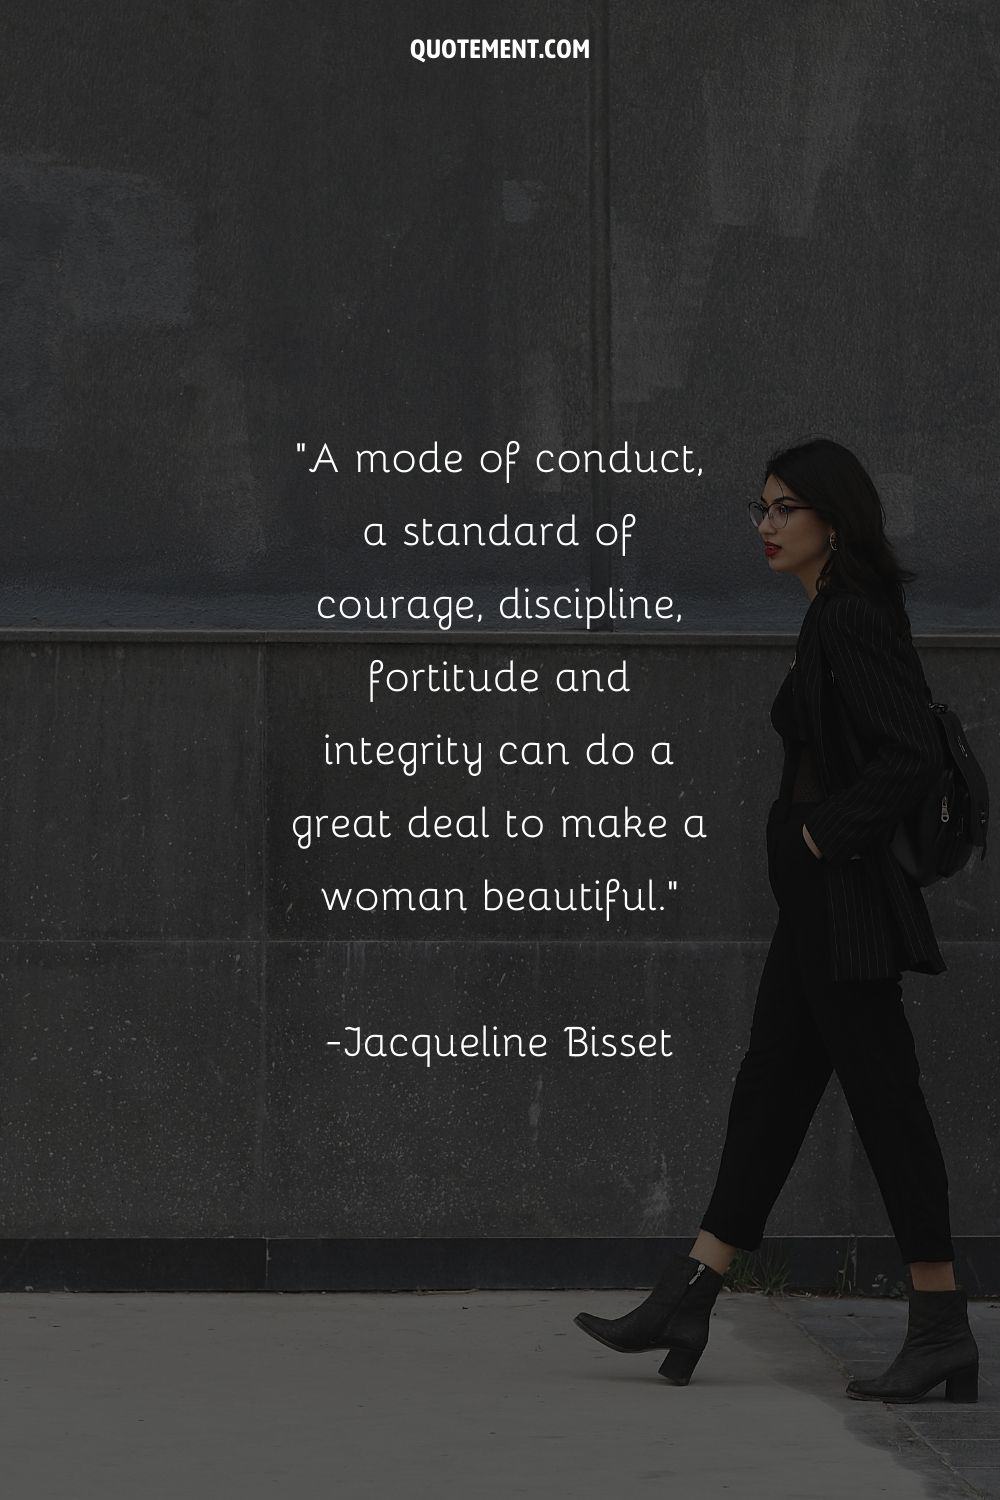 A mode of conduct, a standard of courage, discipline, fortitude and integrity can do a great deal to make a woman beautiful